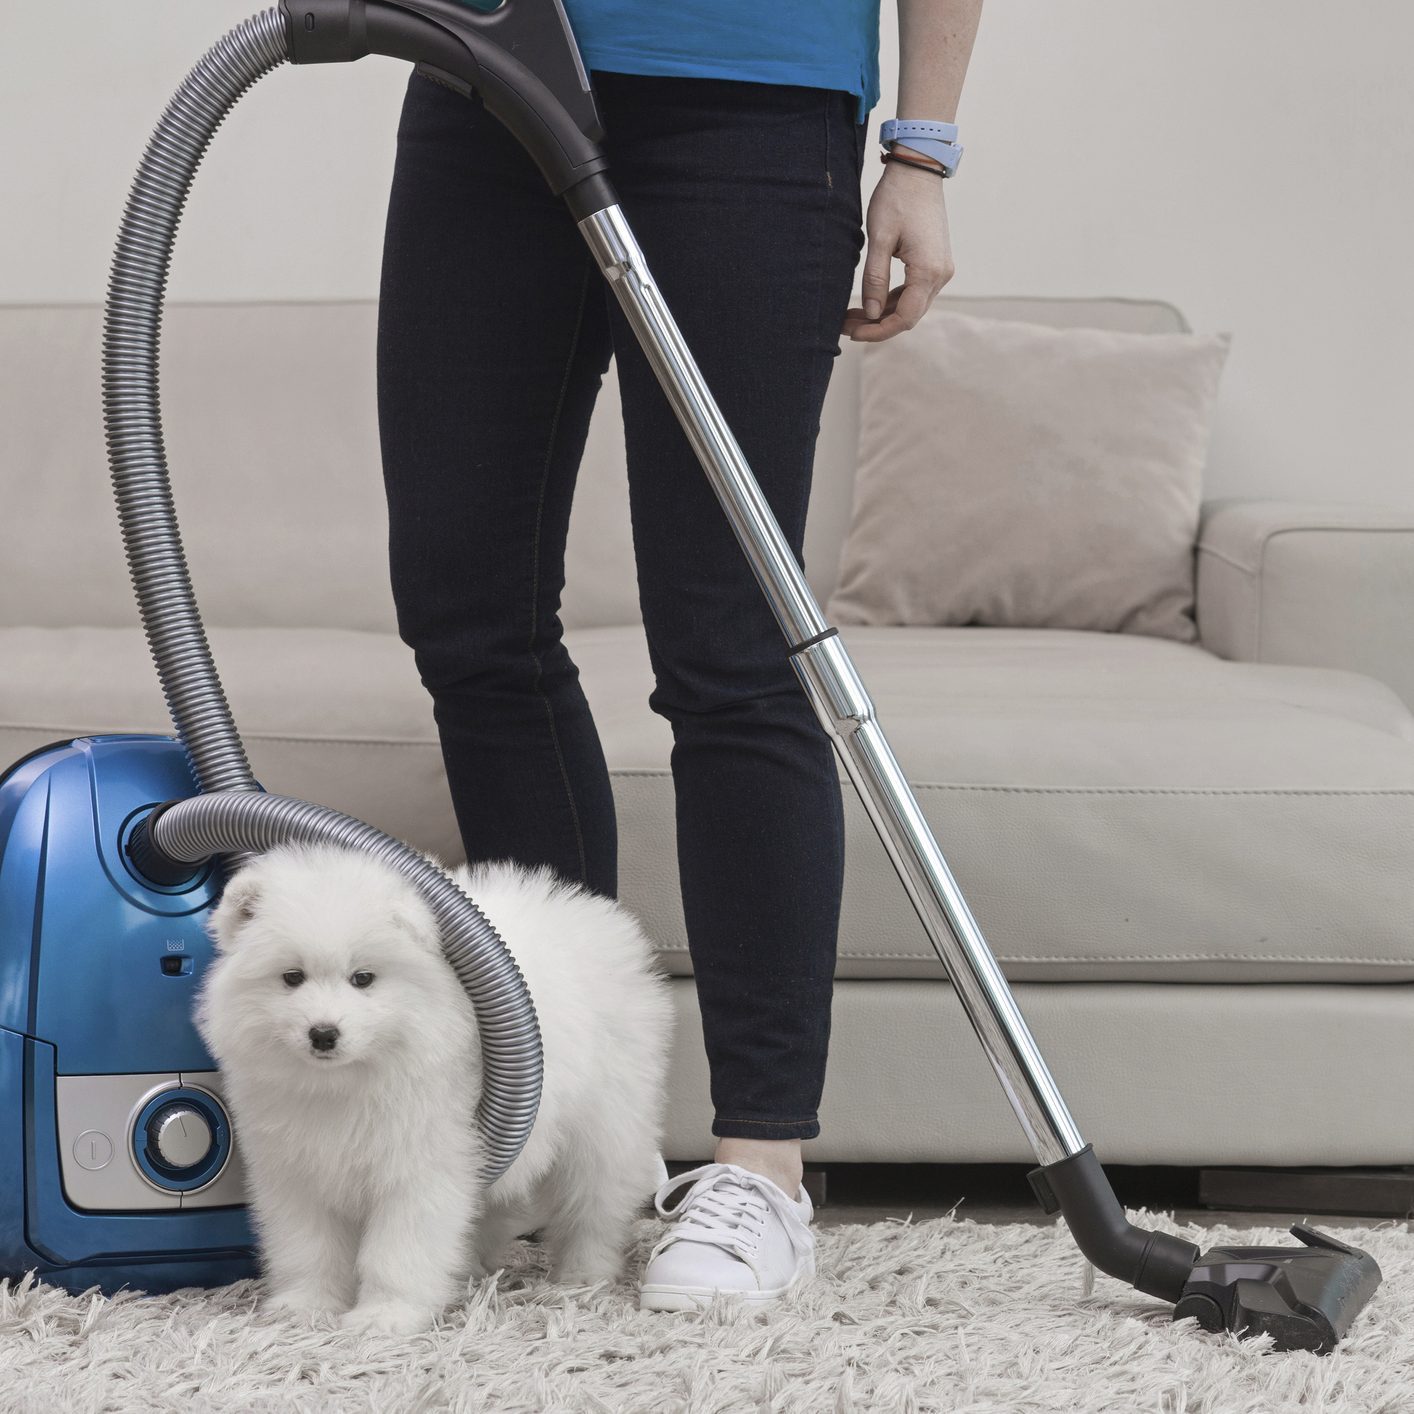 Woman holding vacuum standing with fluffy white dog